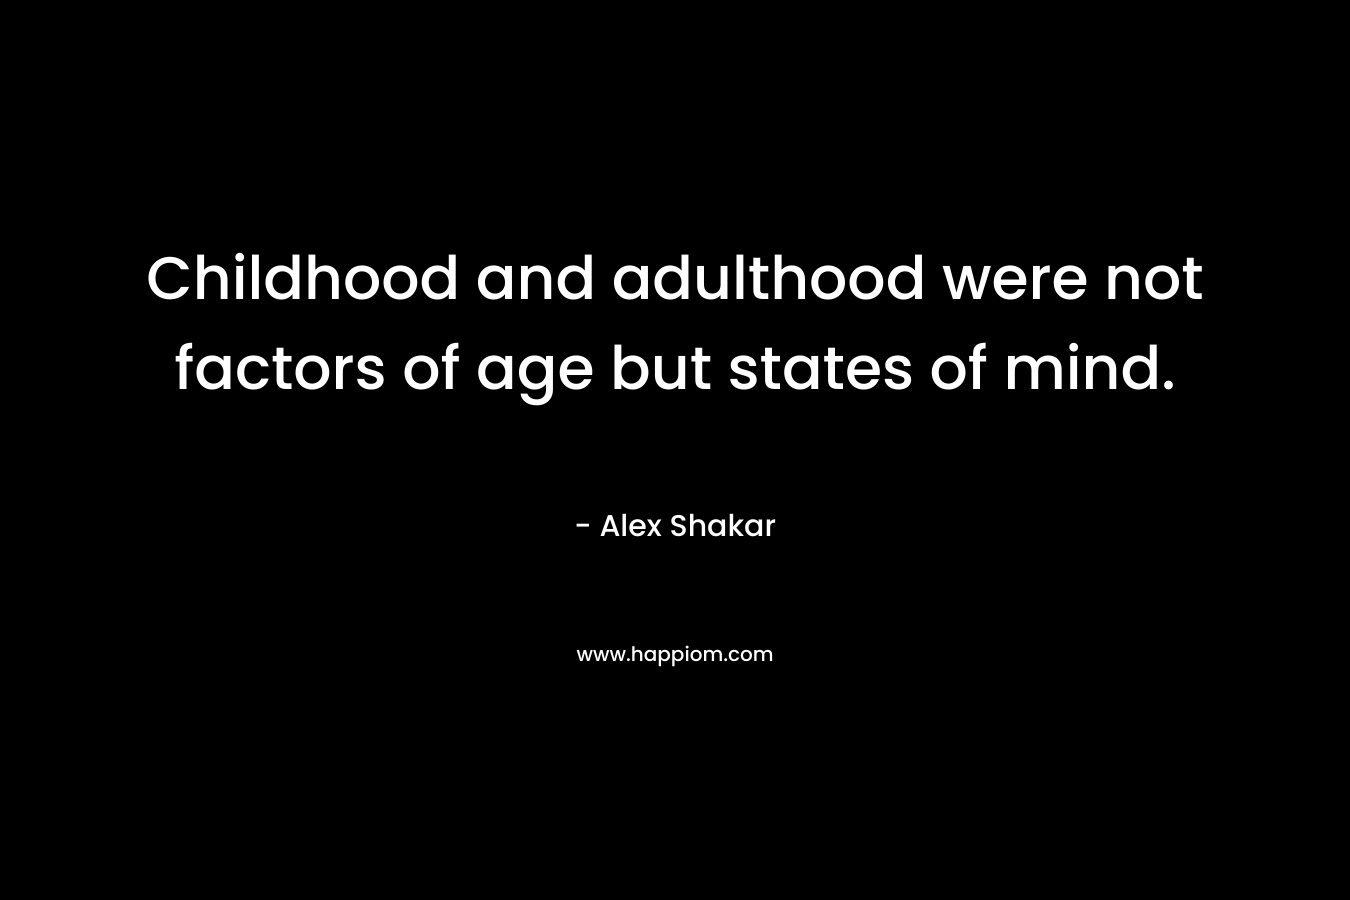 Childhood and adulthood were not factors of age but states of mind. – Alex Shakar